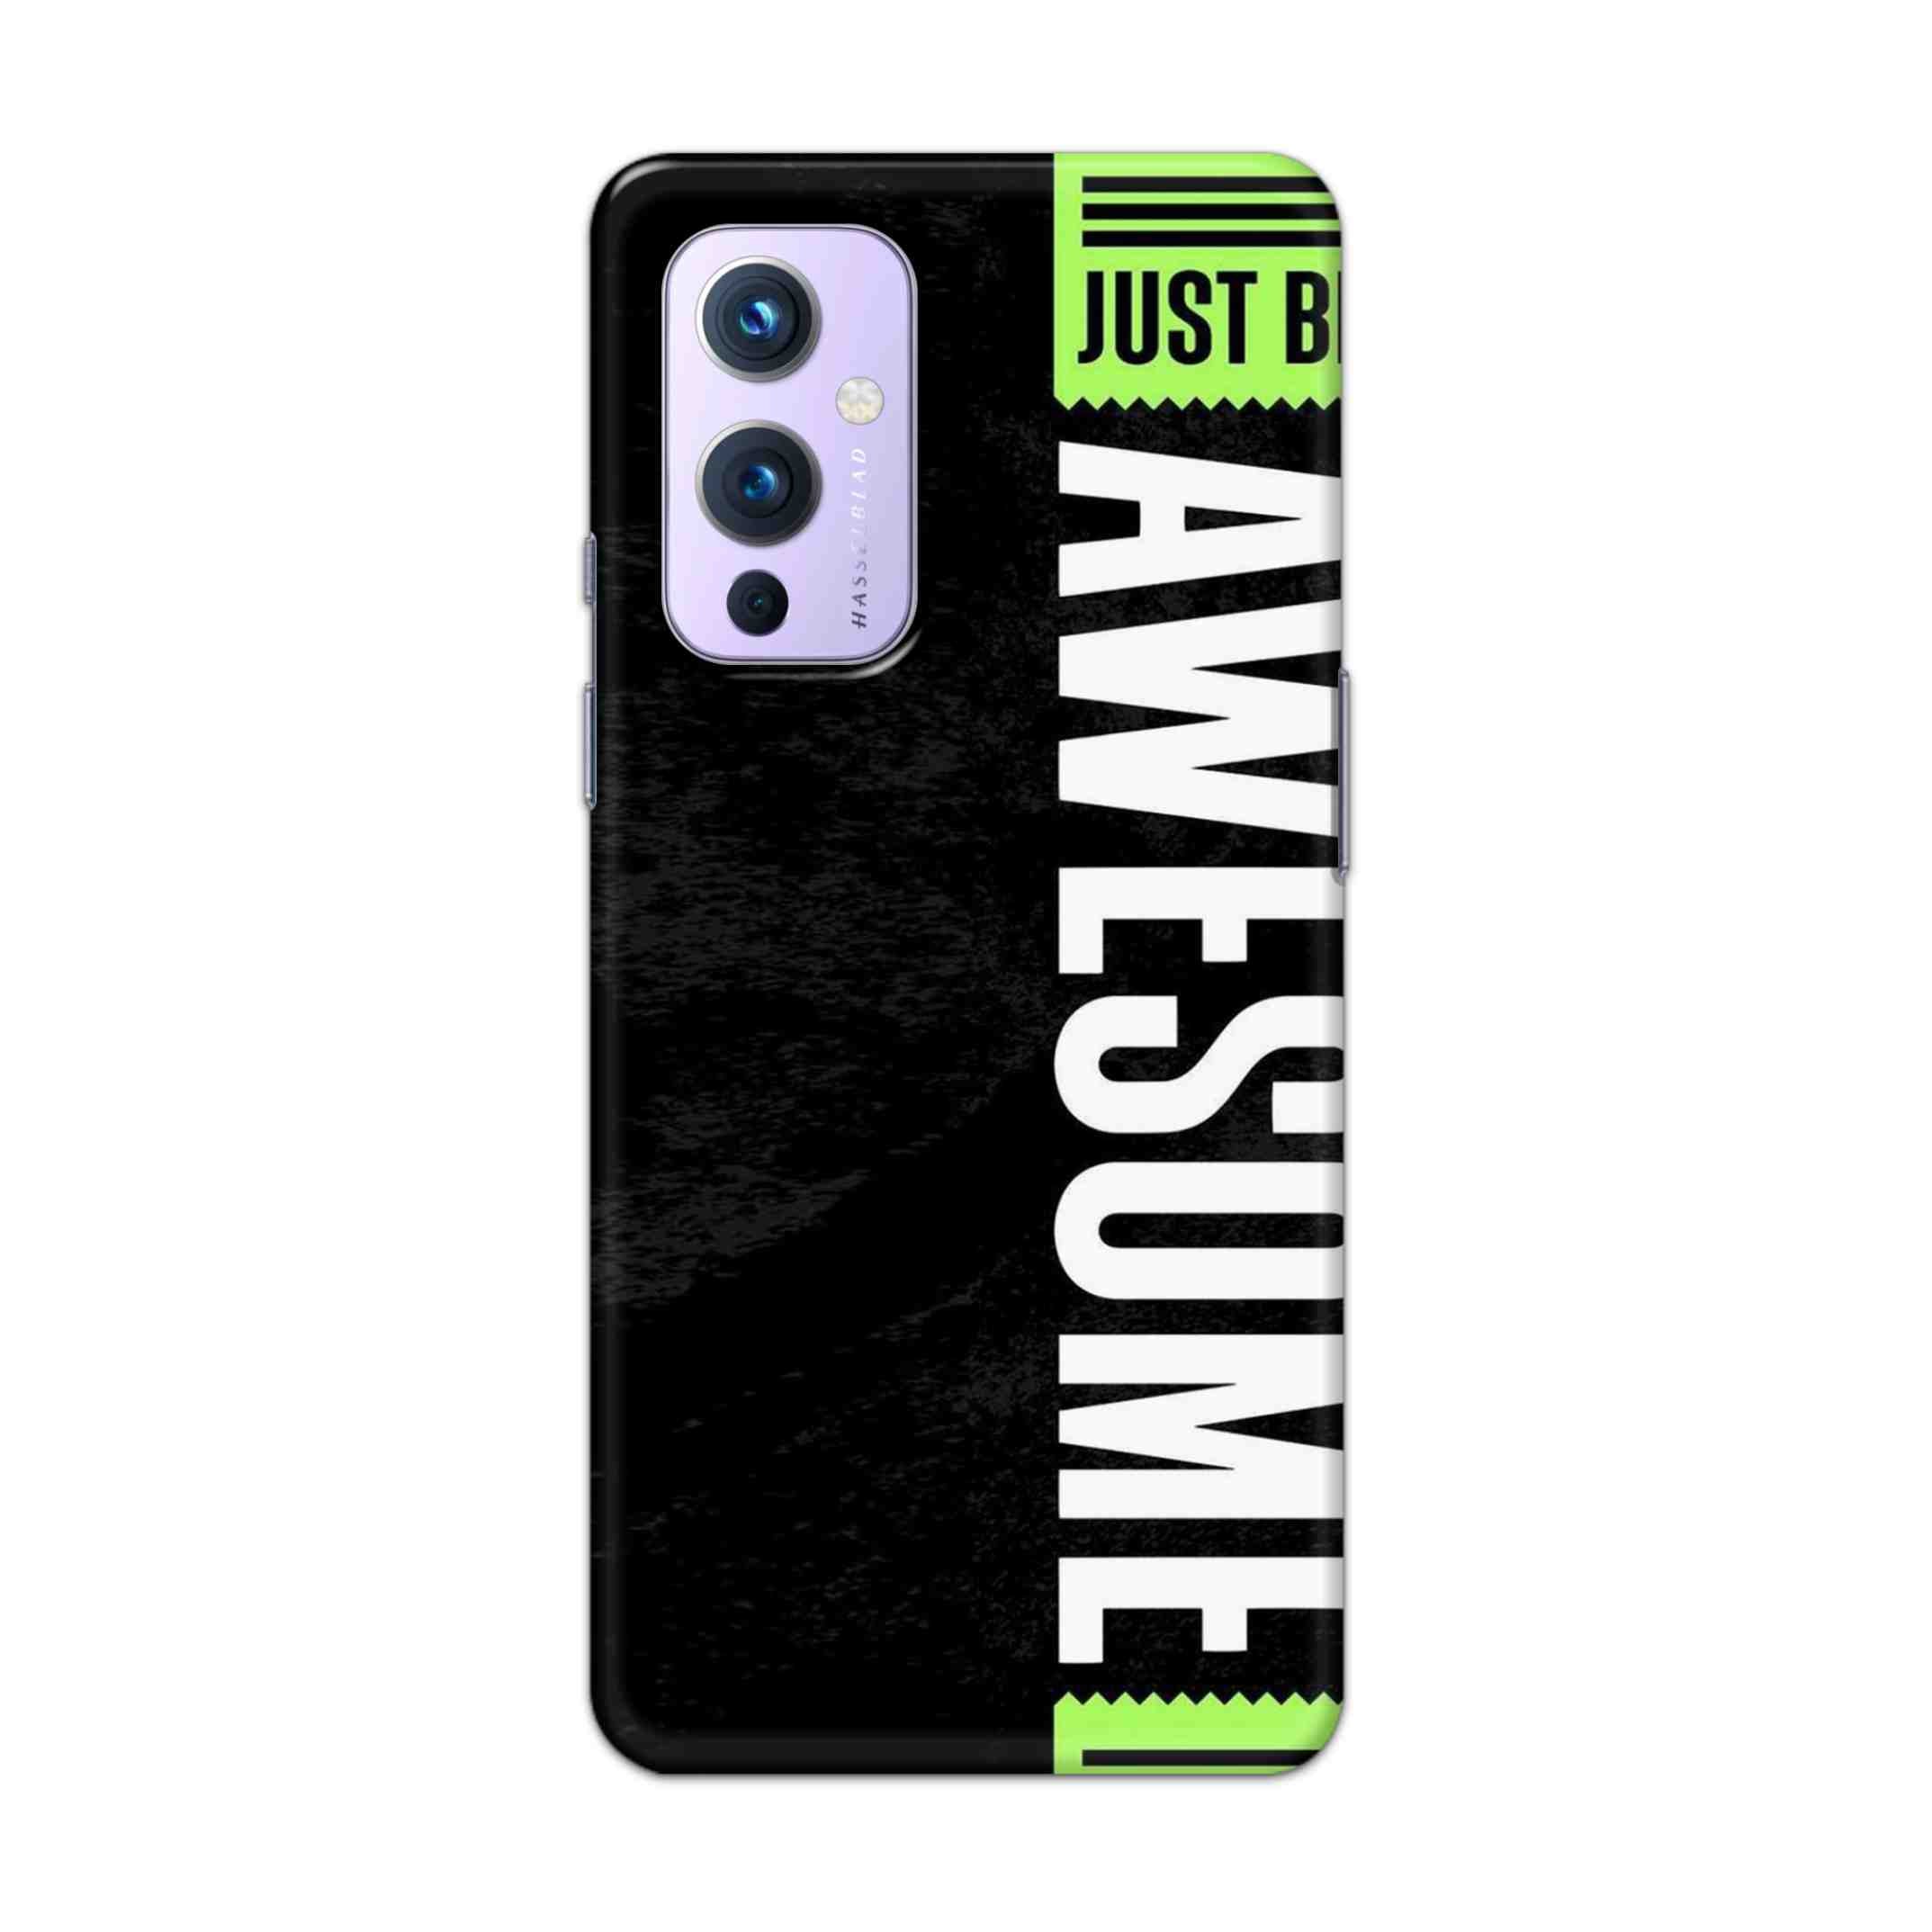 Buy Awesome Street Hard Back Mobile Phone Case Cover For OnePlus 9 Online